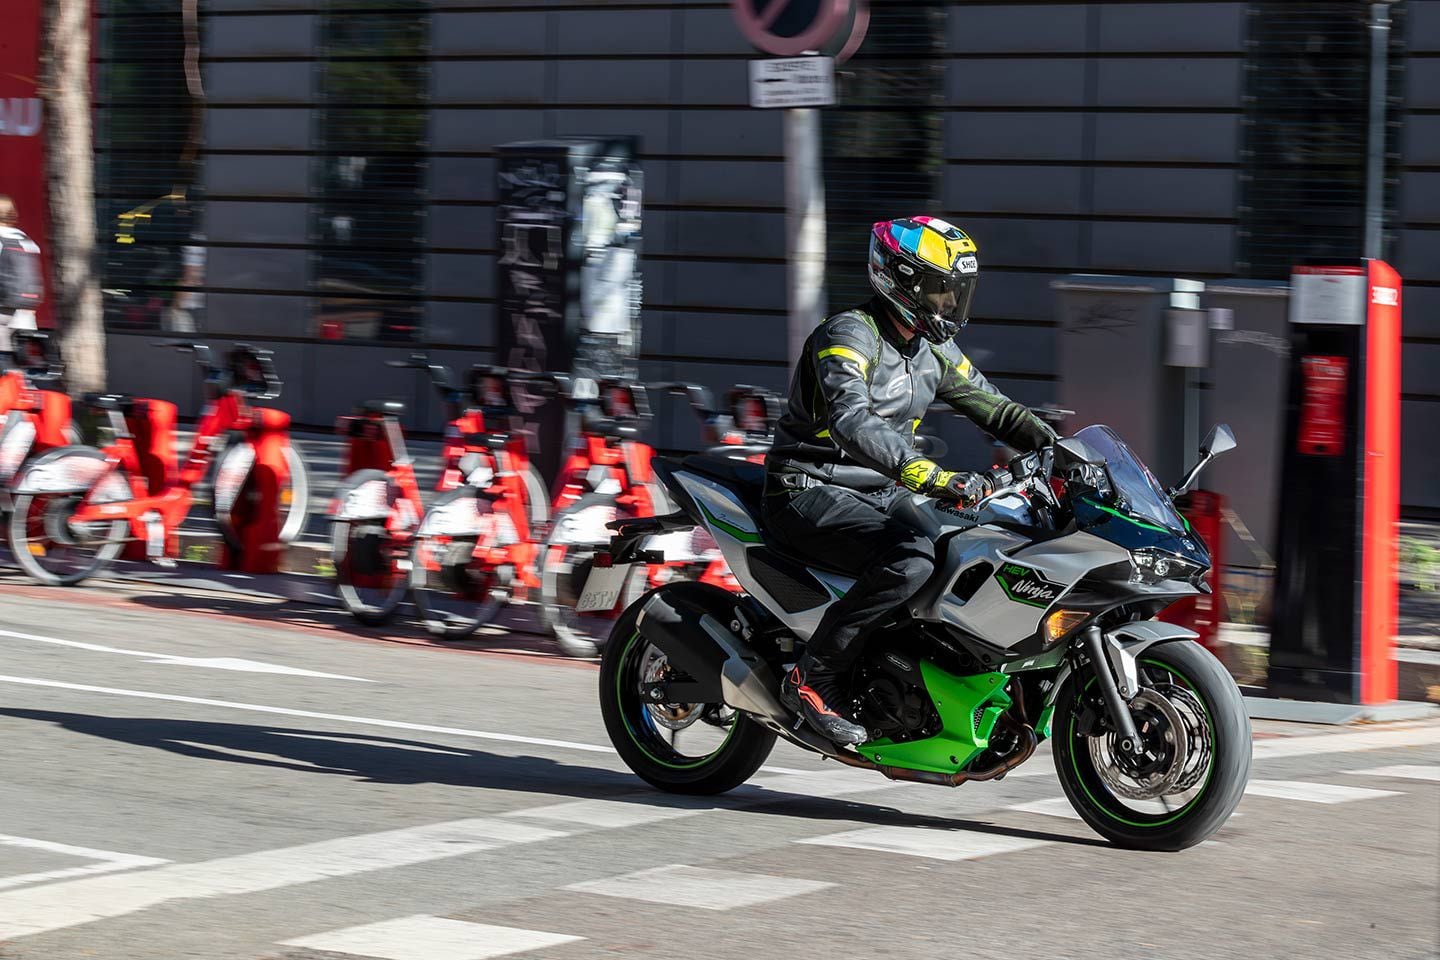 There are a lot of solutions for getting around town, especially in large city centers with vehicle regulations. Kawasaki thinks hybrids offer a unique alternative.